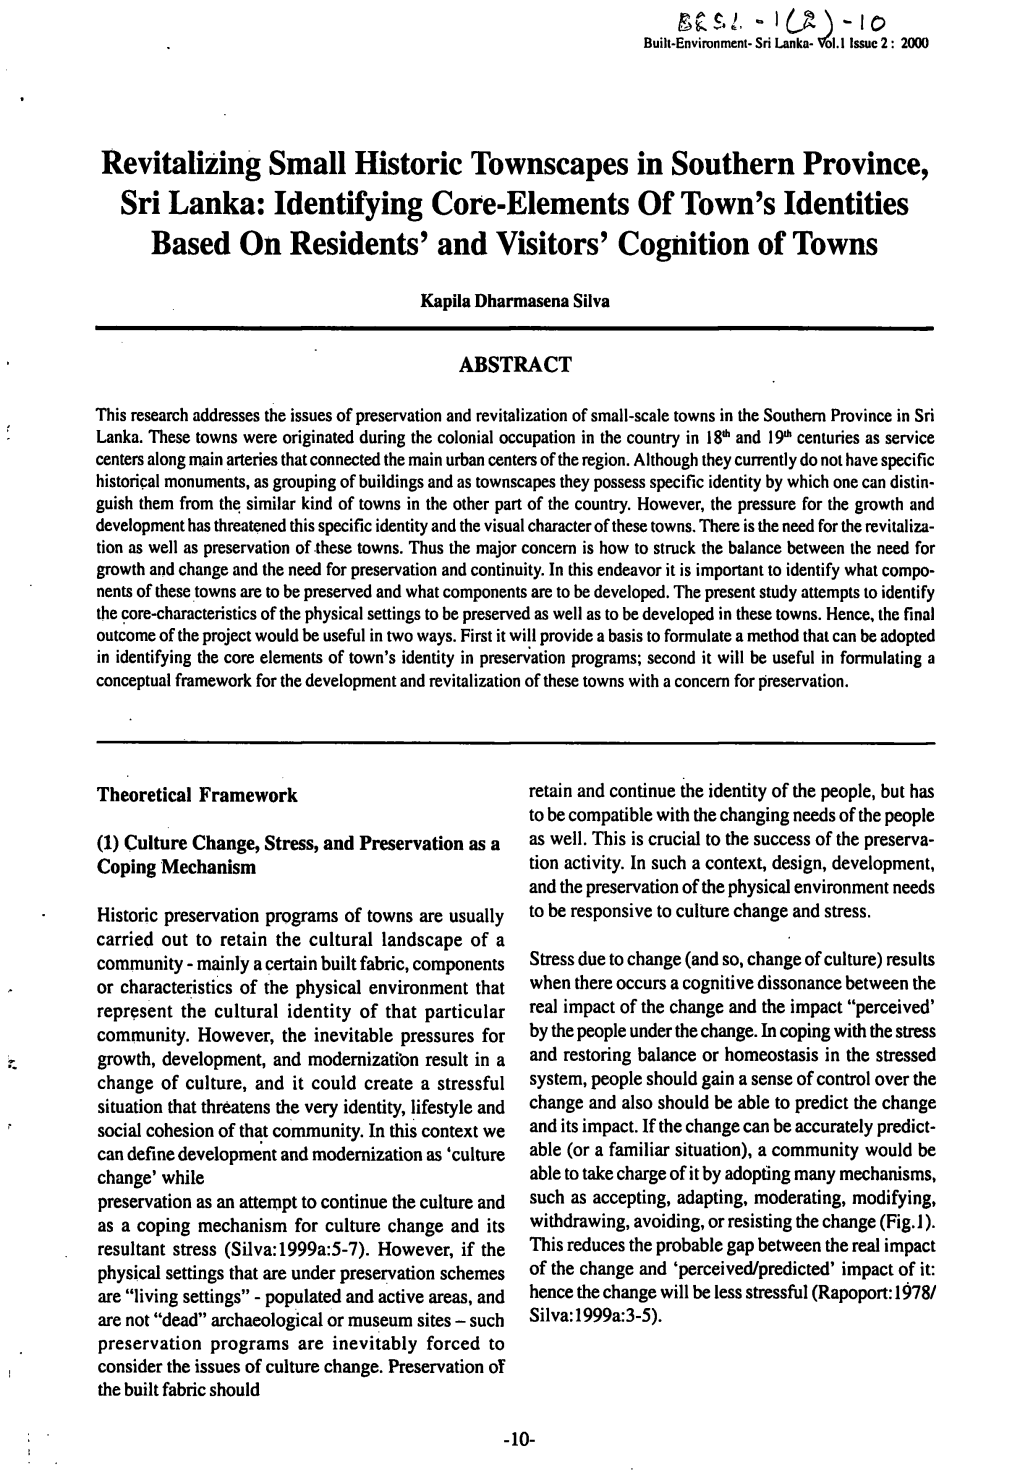 Identifying Core-Elements of Town's Identities Based on Residents' and Visitors' Cognition of Towns